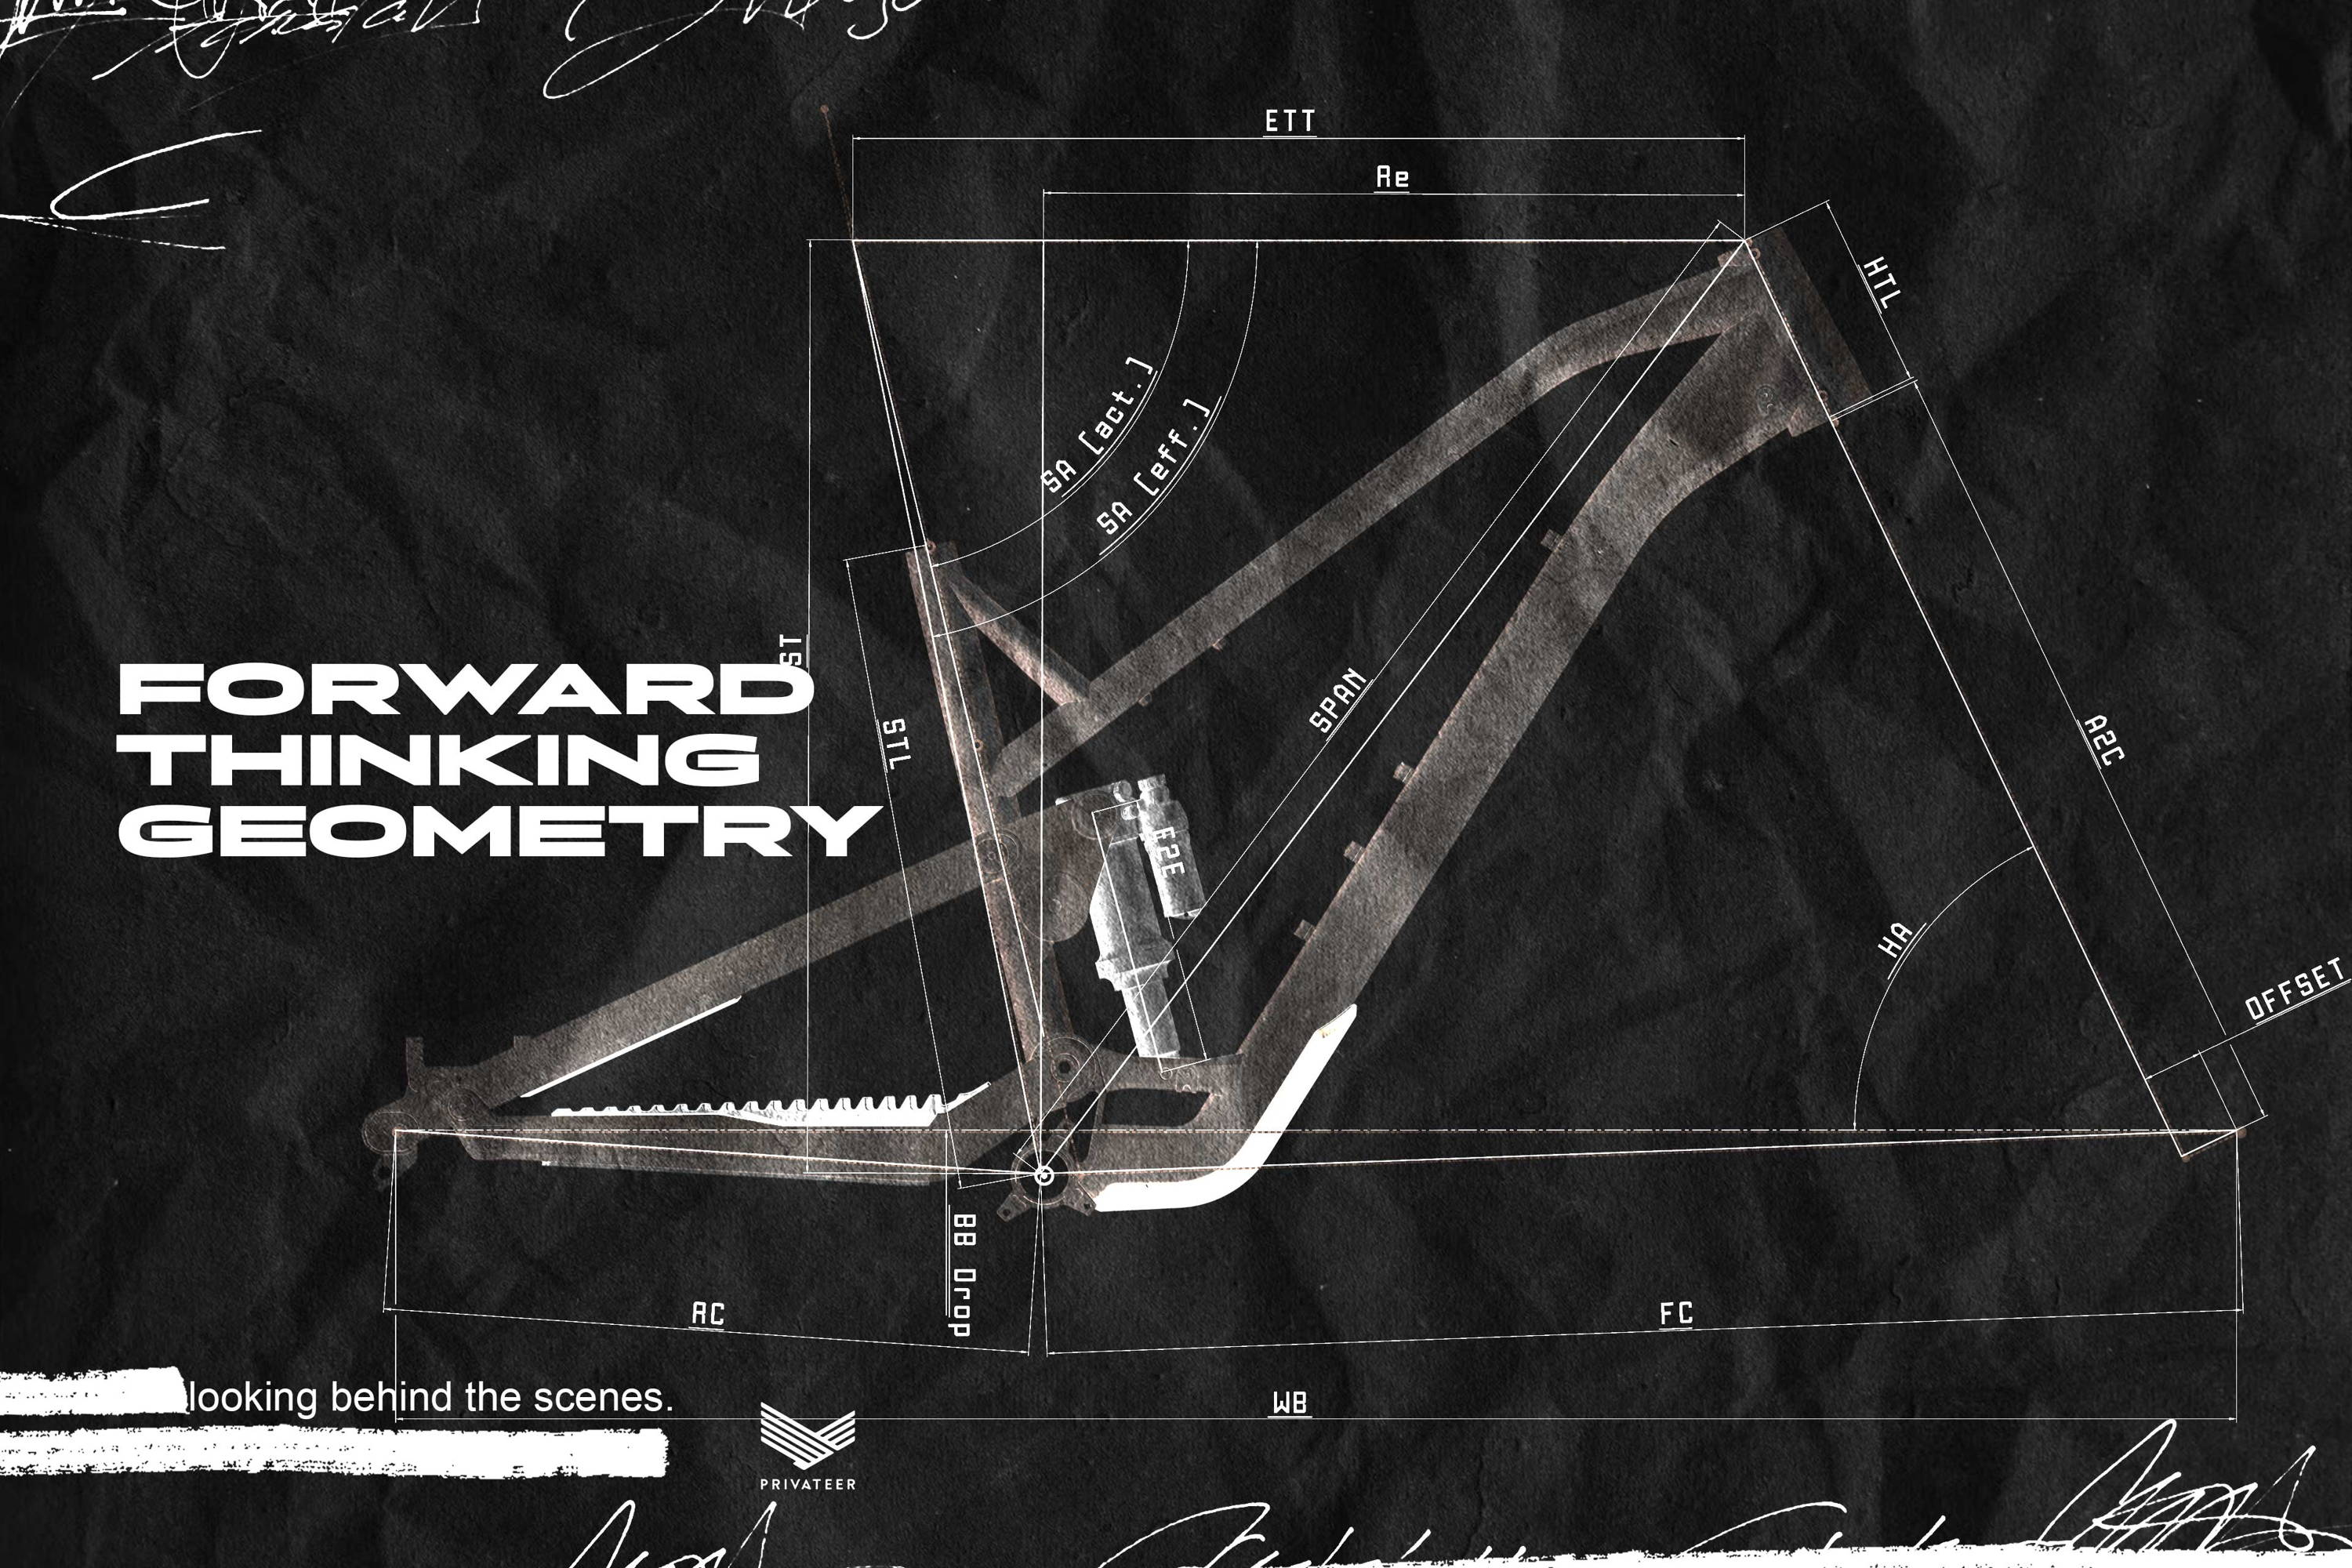 Forward thinking geometry graphic banner